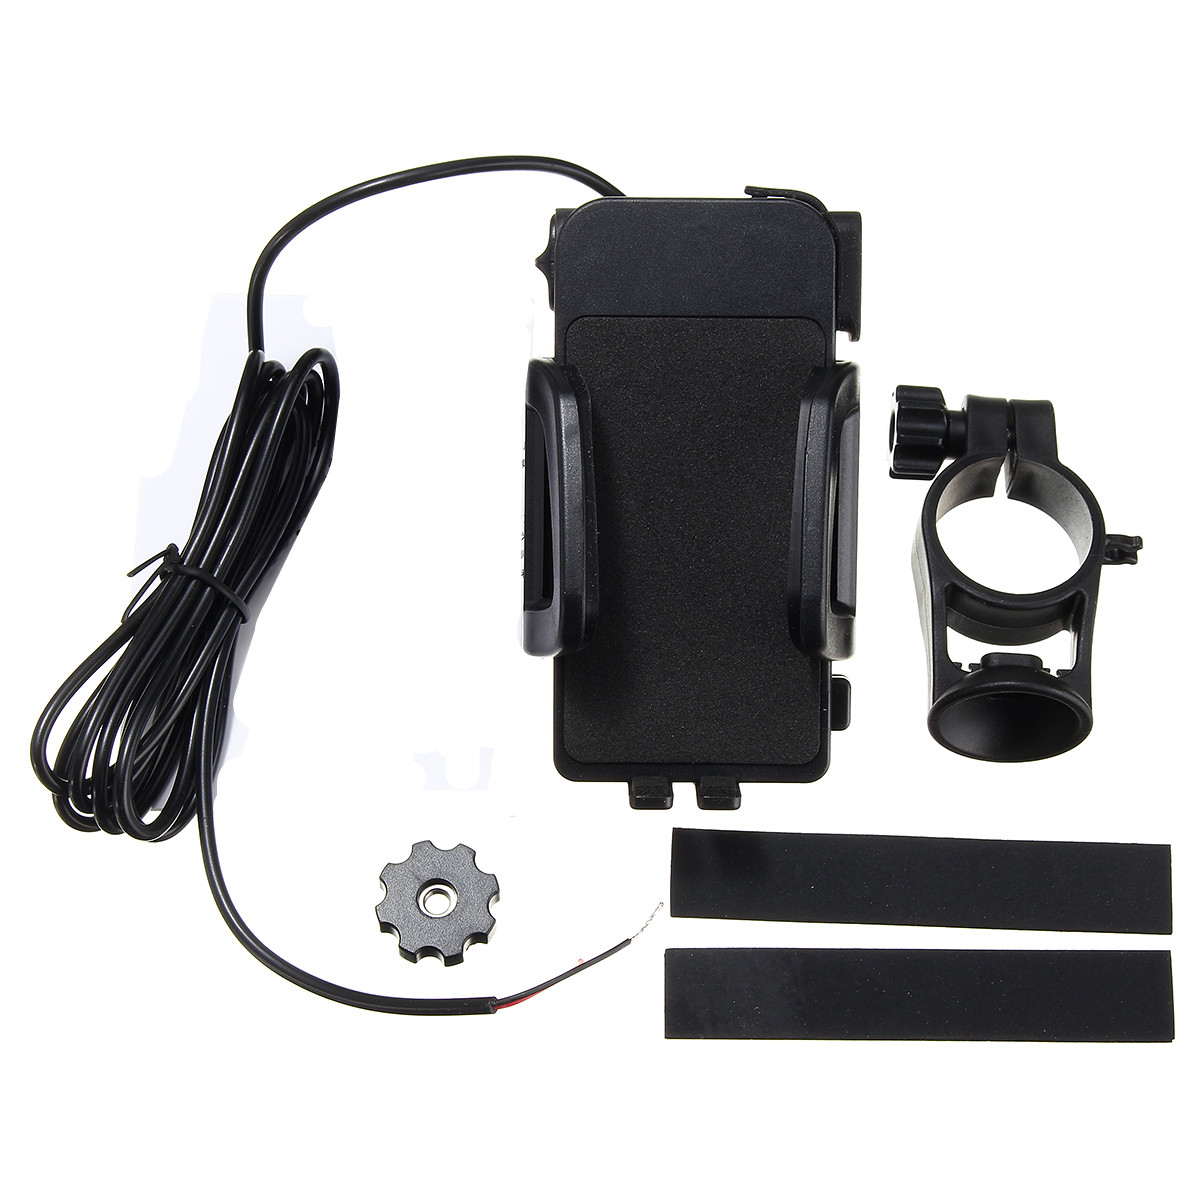 4.7-6 Inch Phone GPS Navigation Holder 12V-85V USB Charger for Motorcycle Electric Bicycle Scooter Handlebar Universal